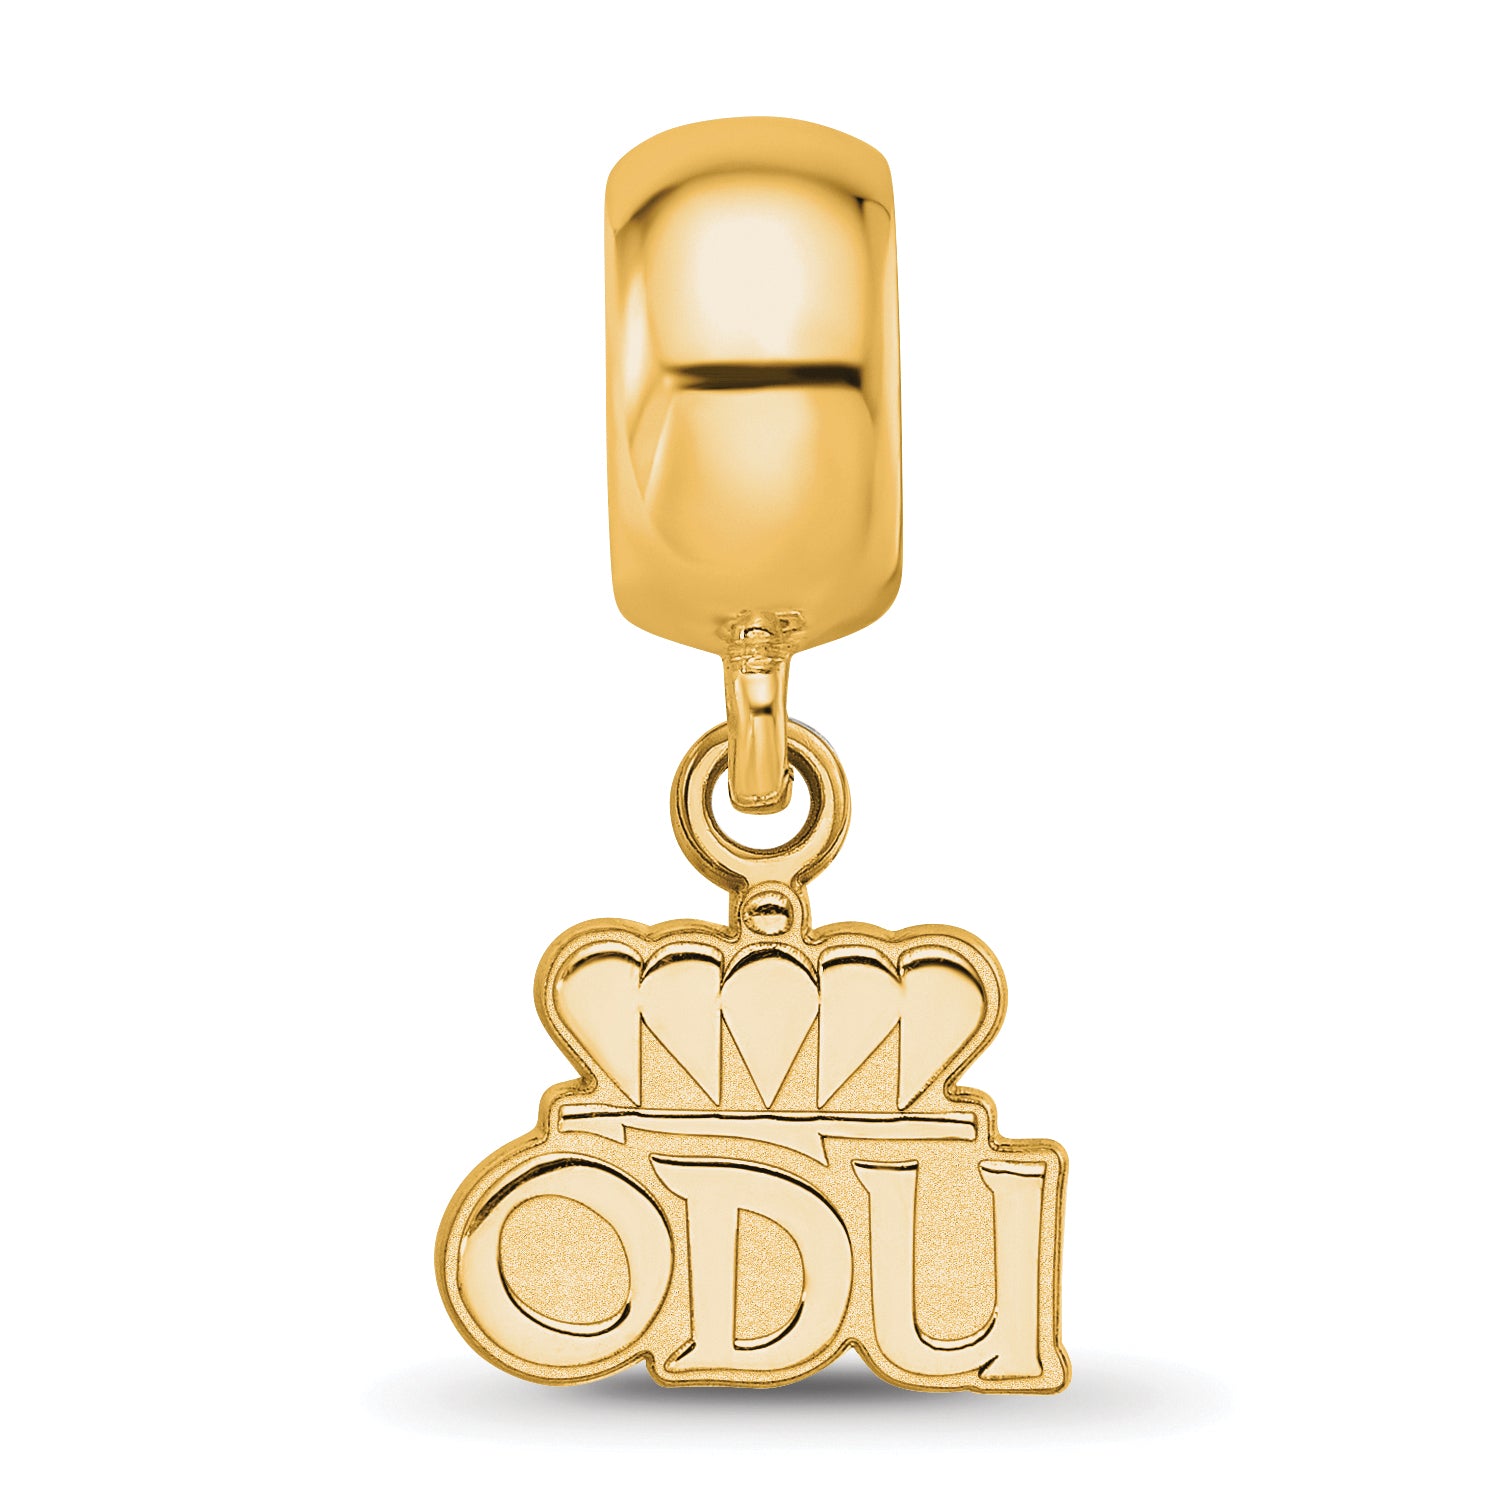 Sterling Silver Gold-plated Logo Art Old Dominion University O-D-U Extra Small Dangle Bead Charm